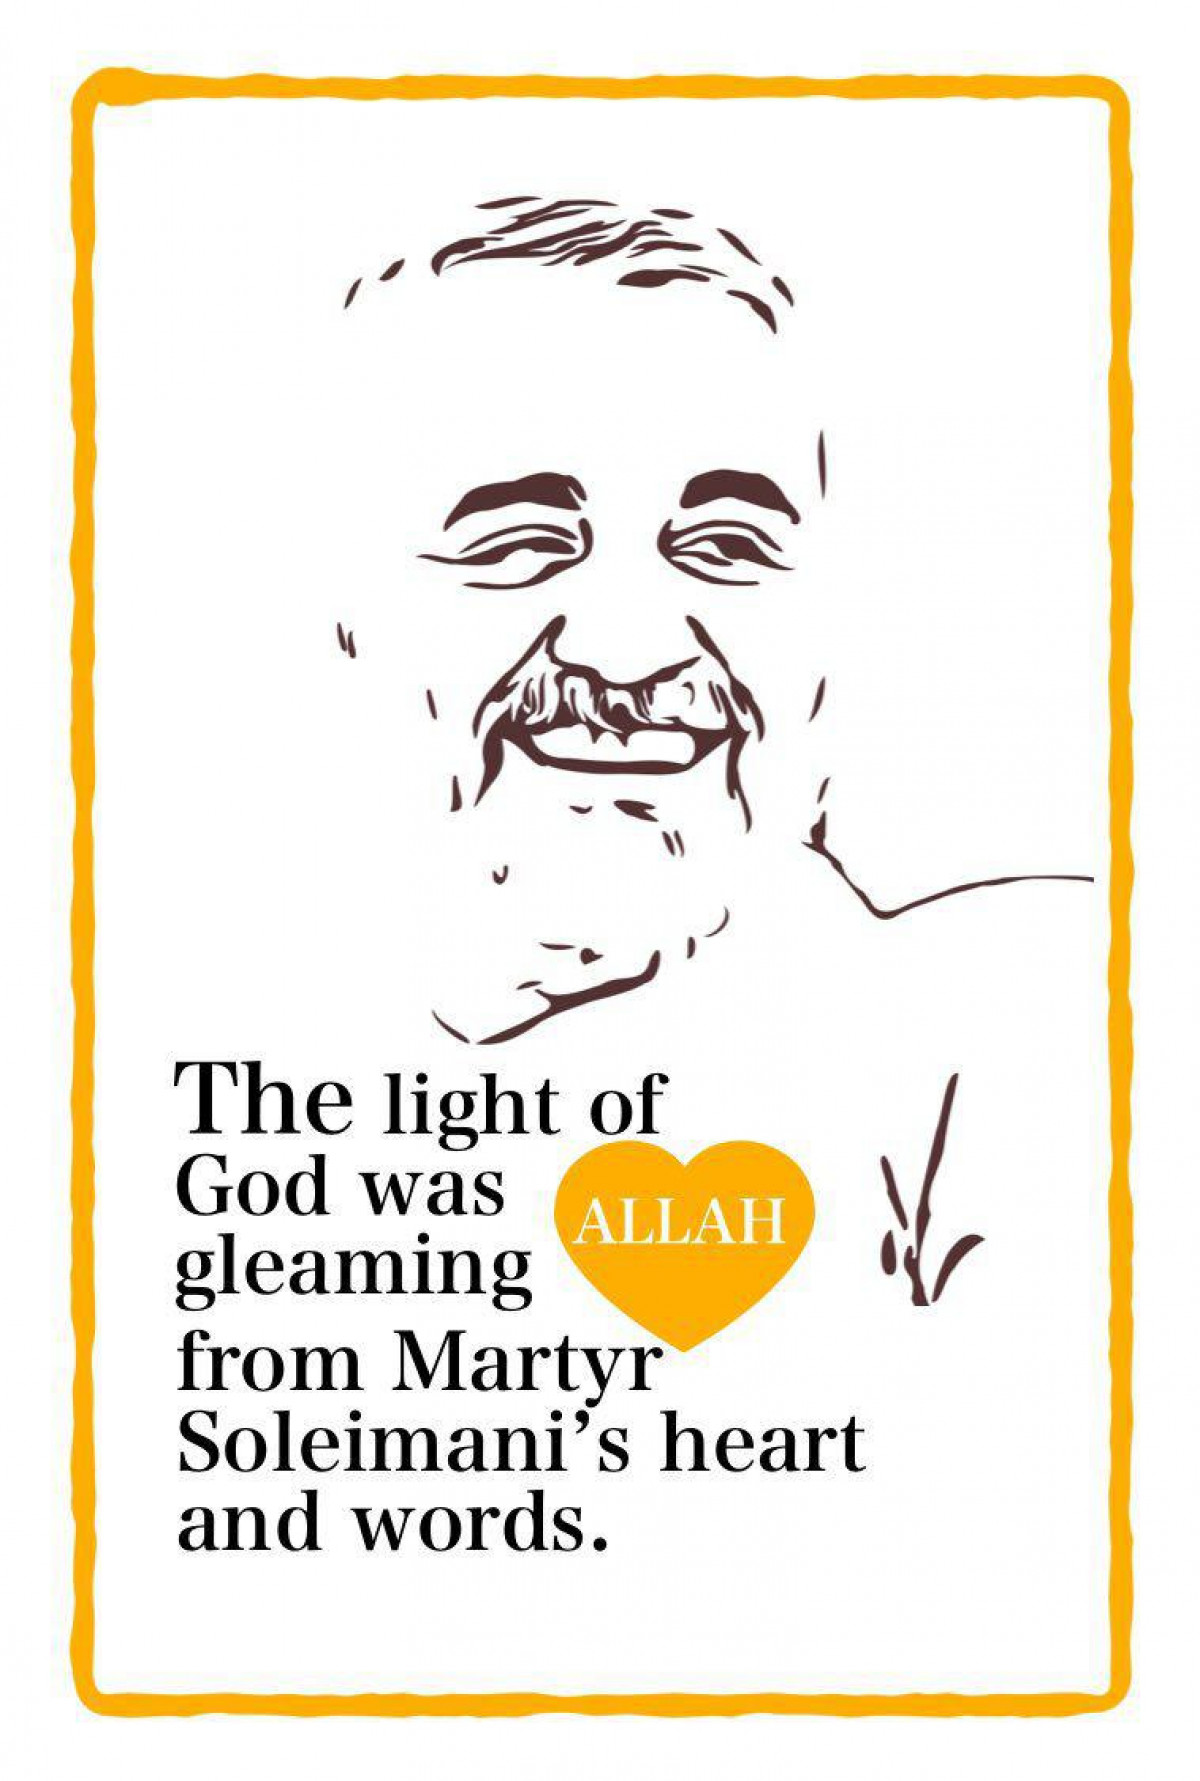 The light of God was ALLAH gleaming from Martyr Soleimani’s heart and words